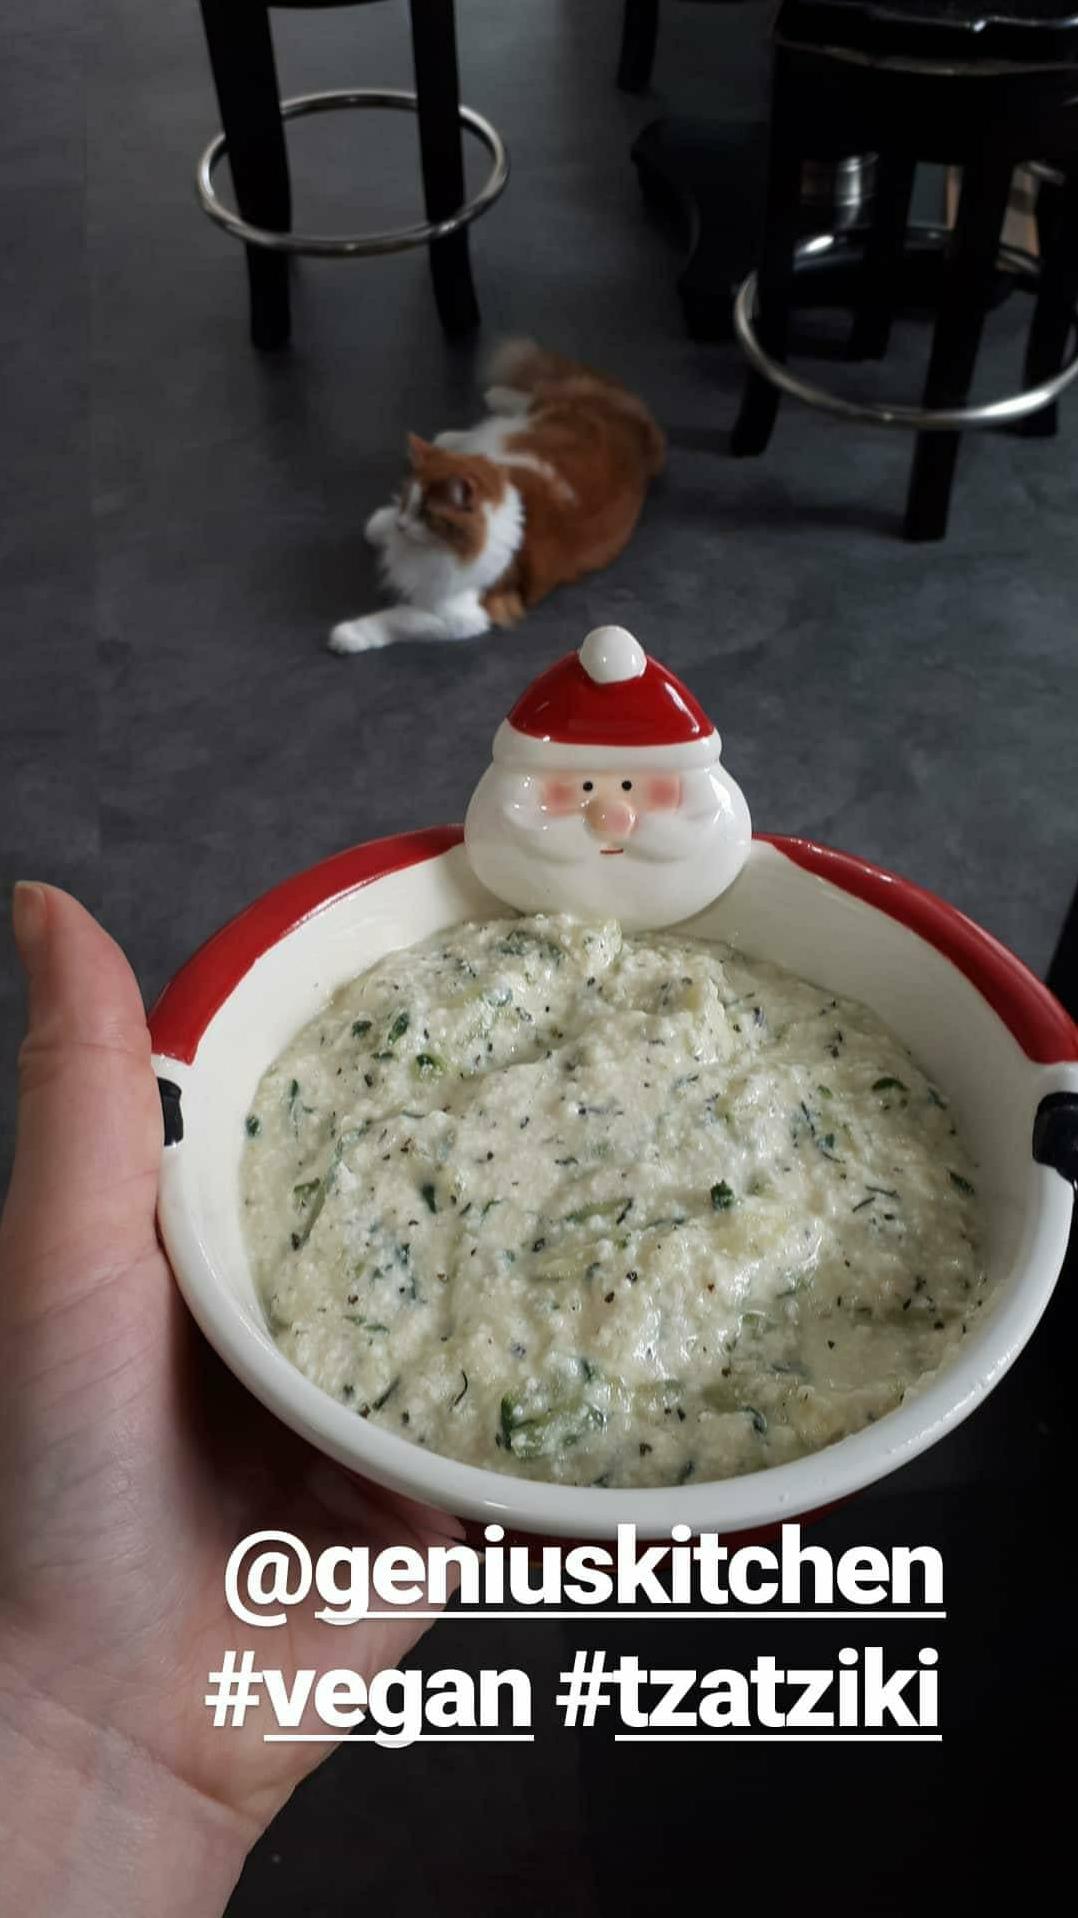  Cooling and refreshing Vegan Tzatziki to soothe your taste buds.